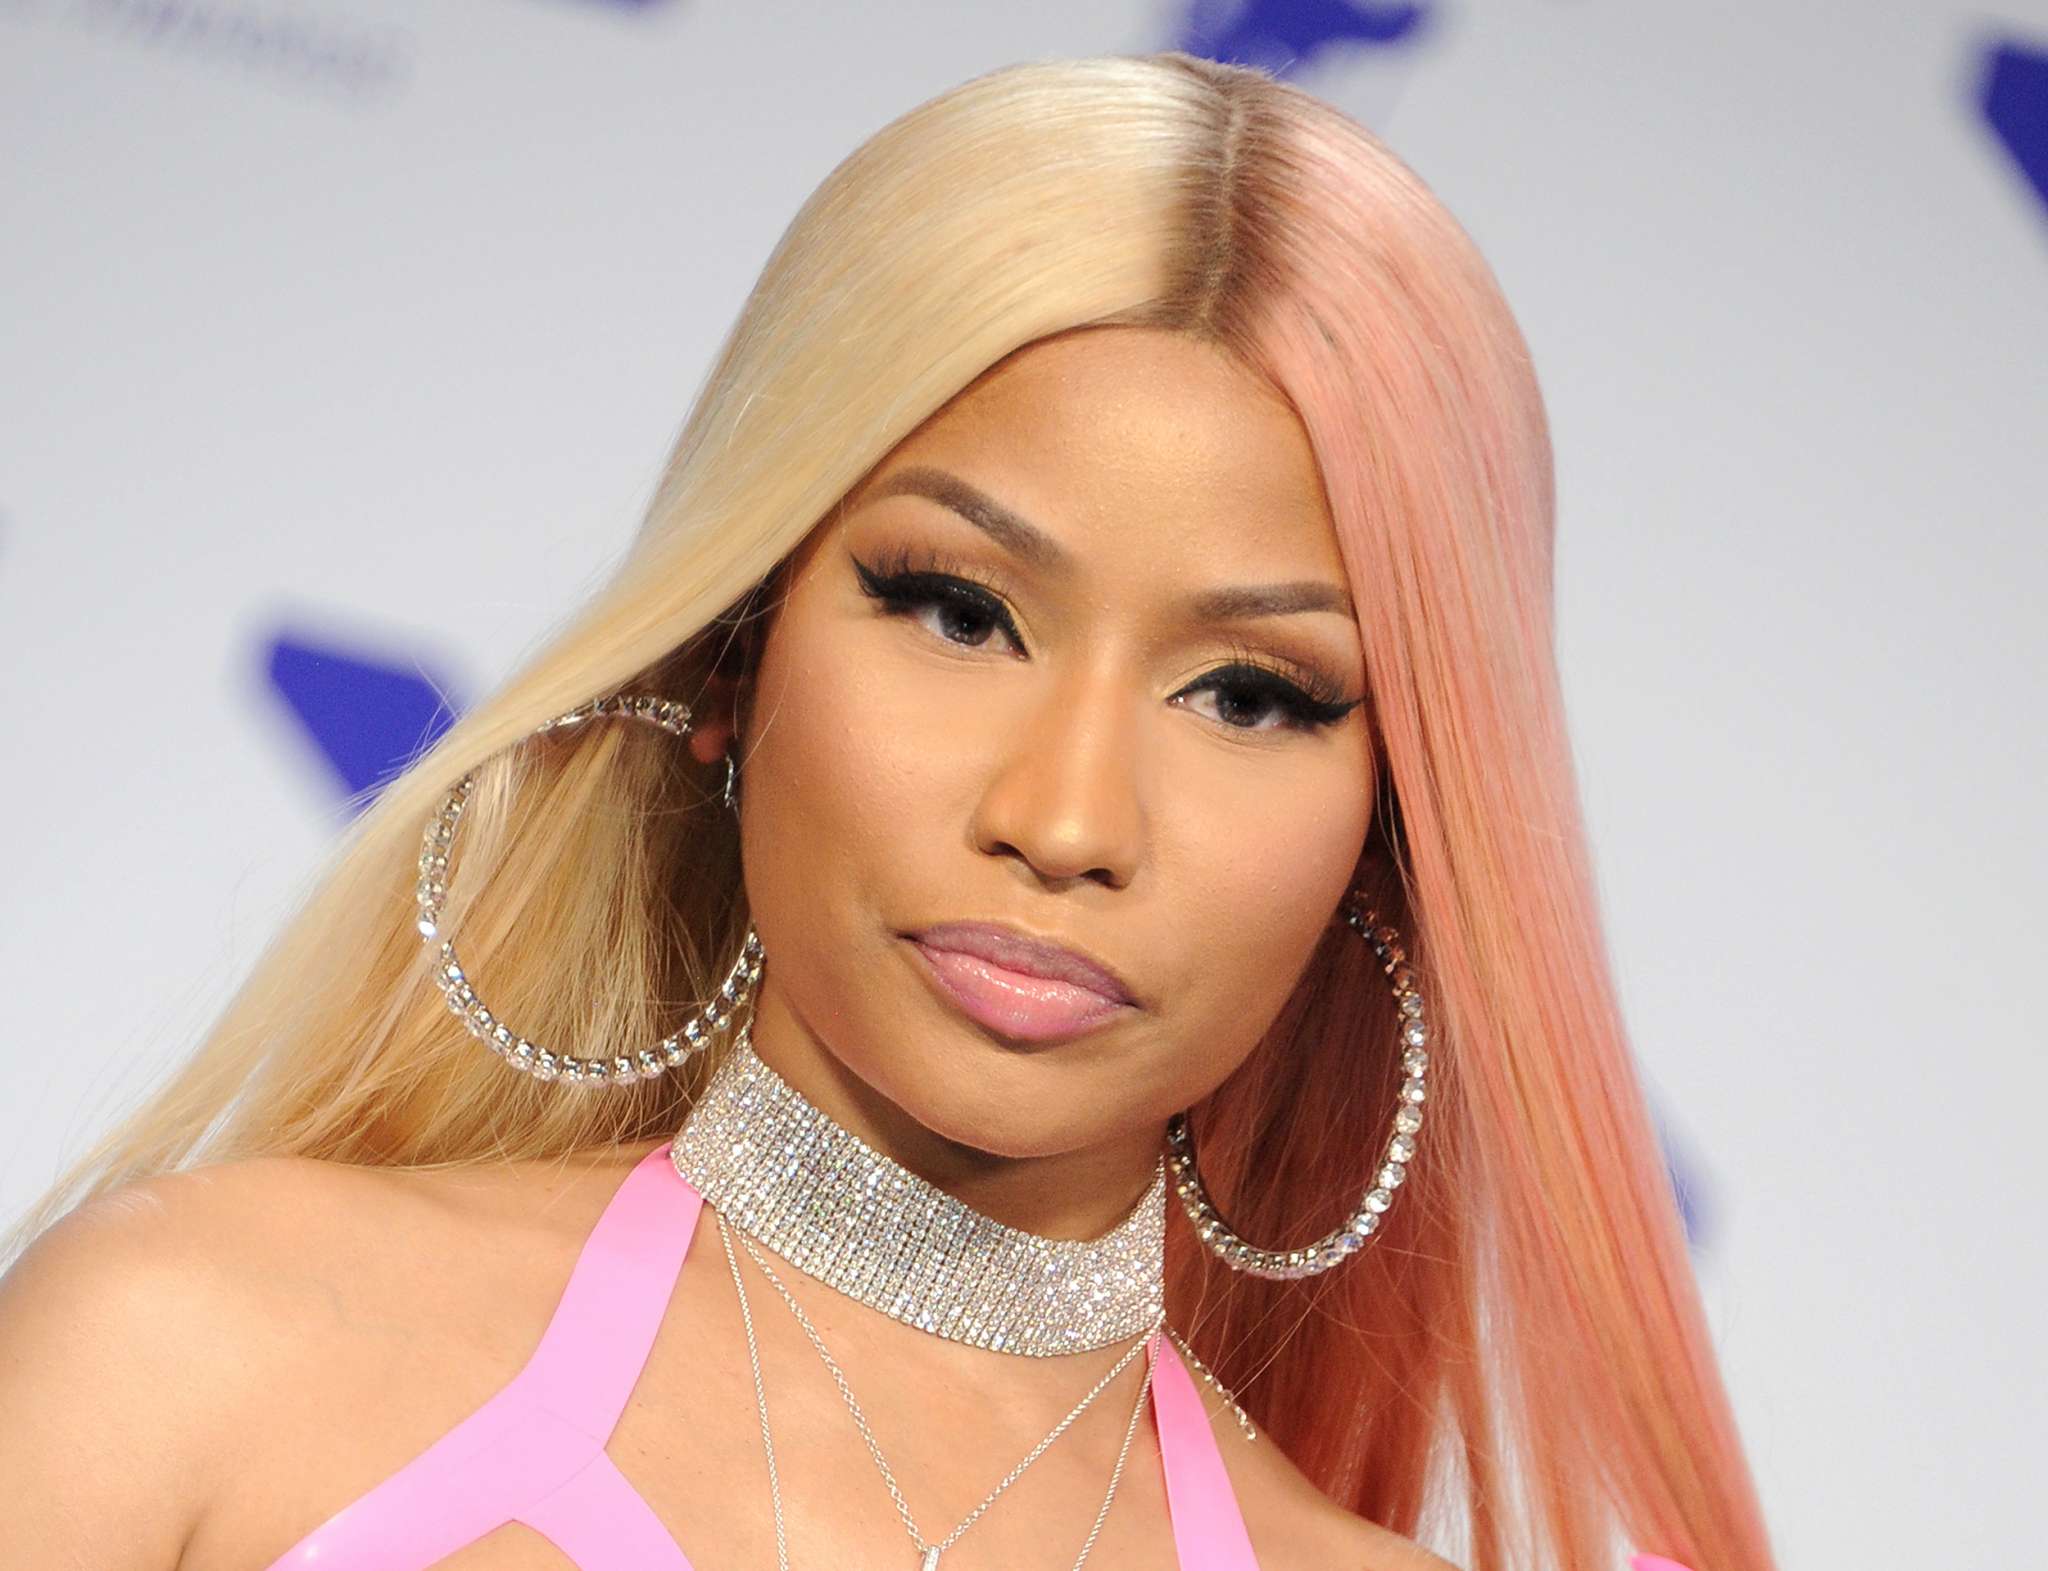 nicki-minaj-is-grateful-for-a-decade-of-support